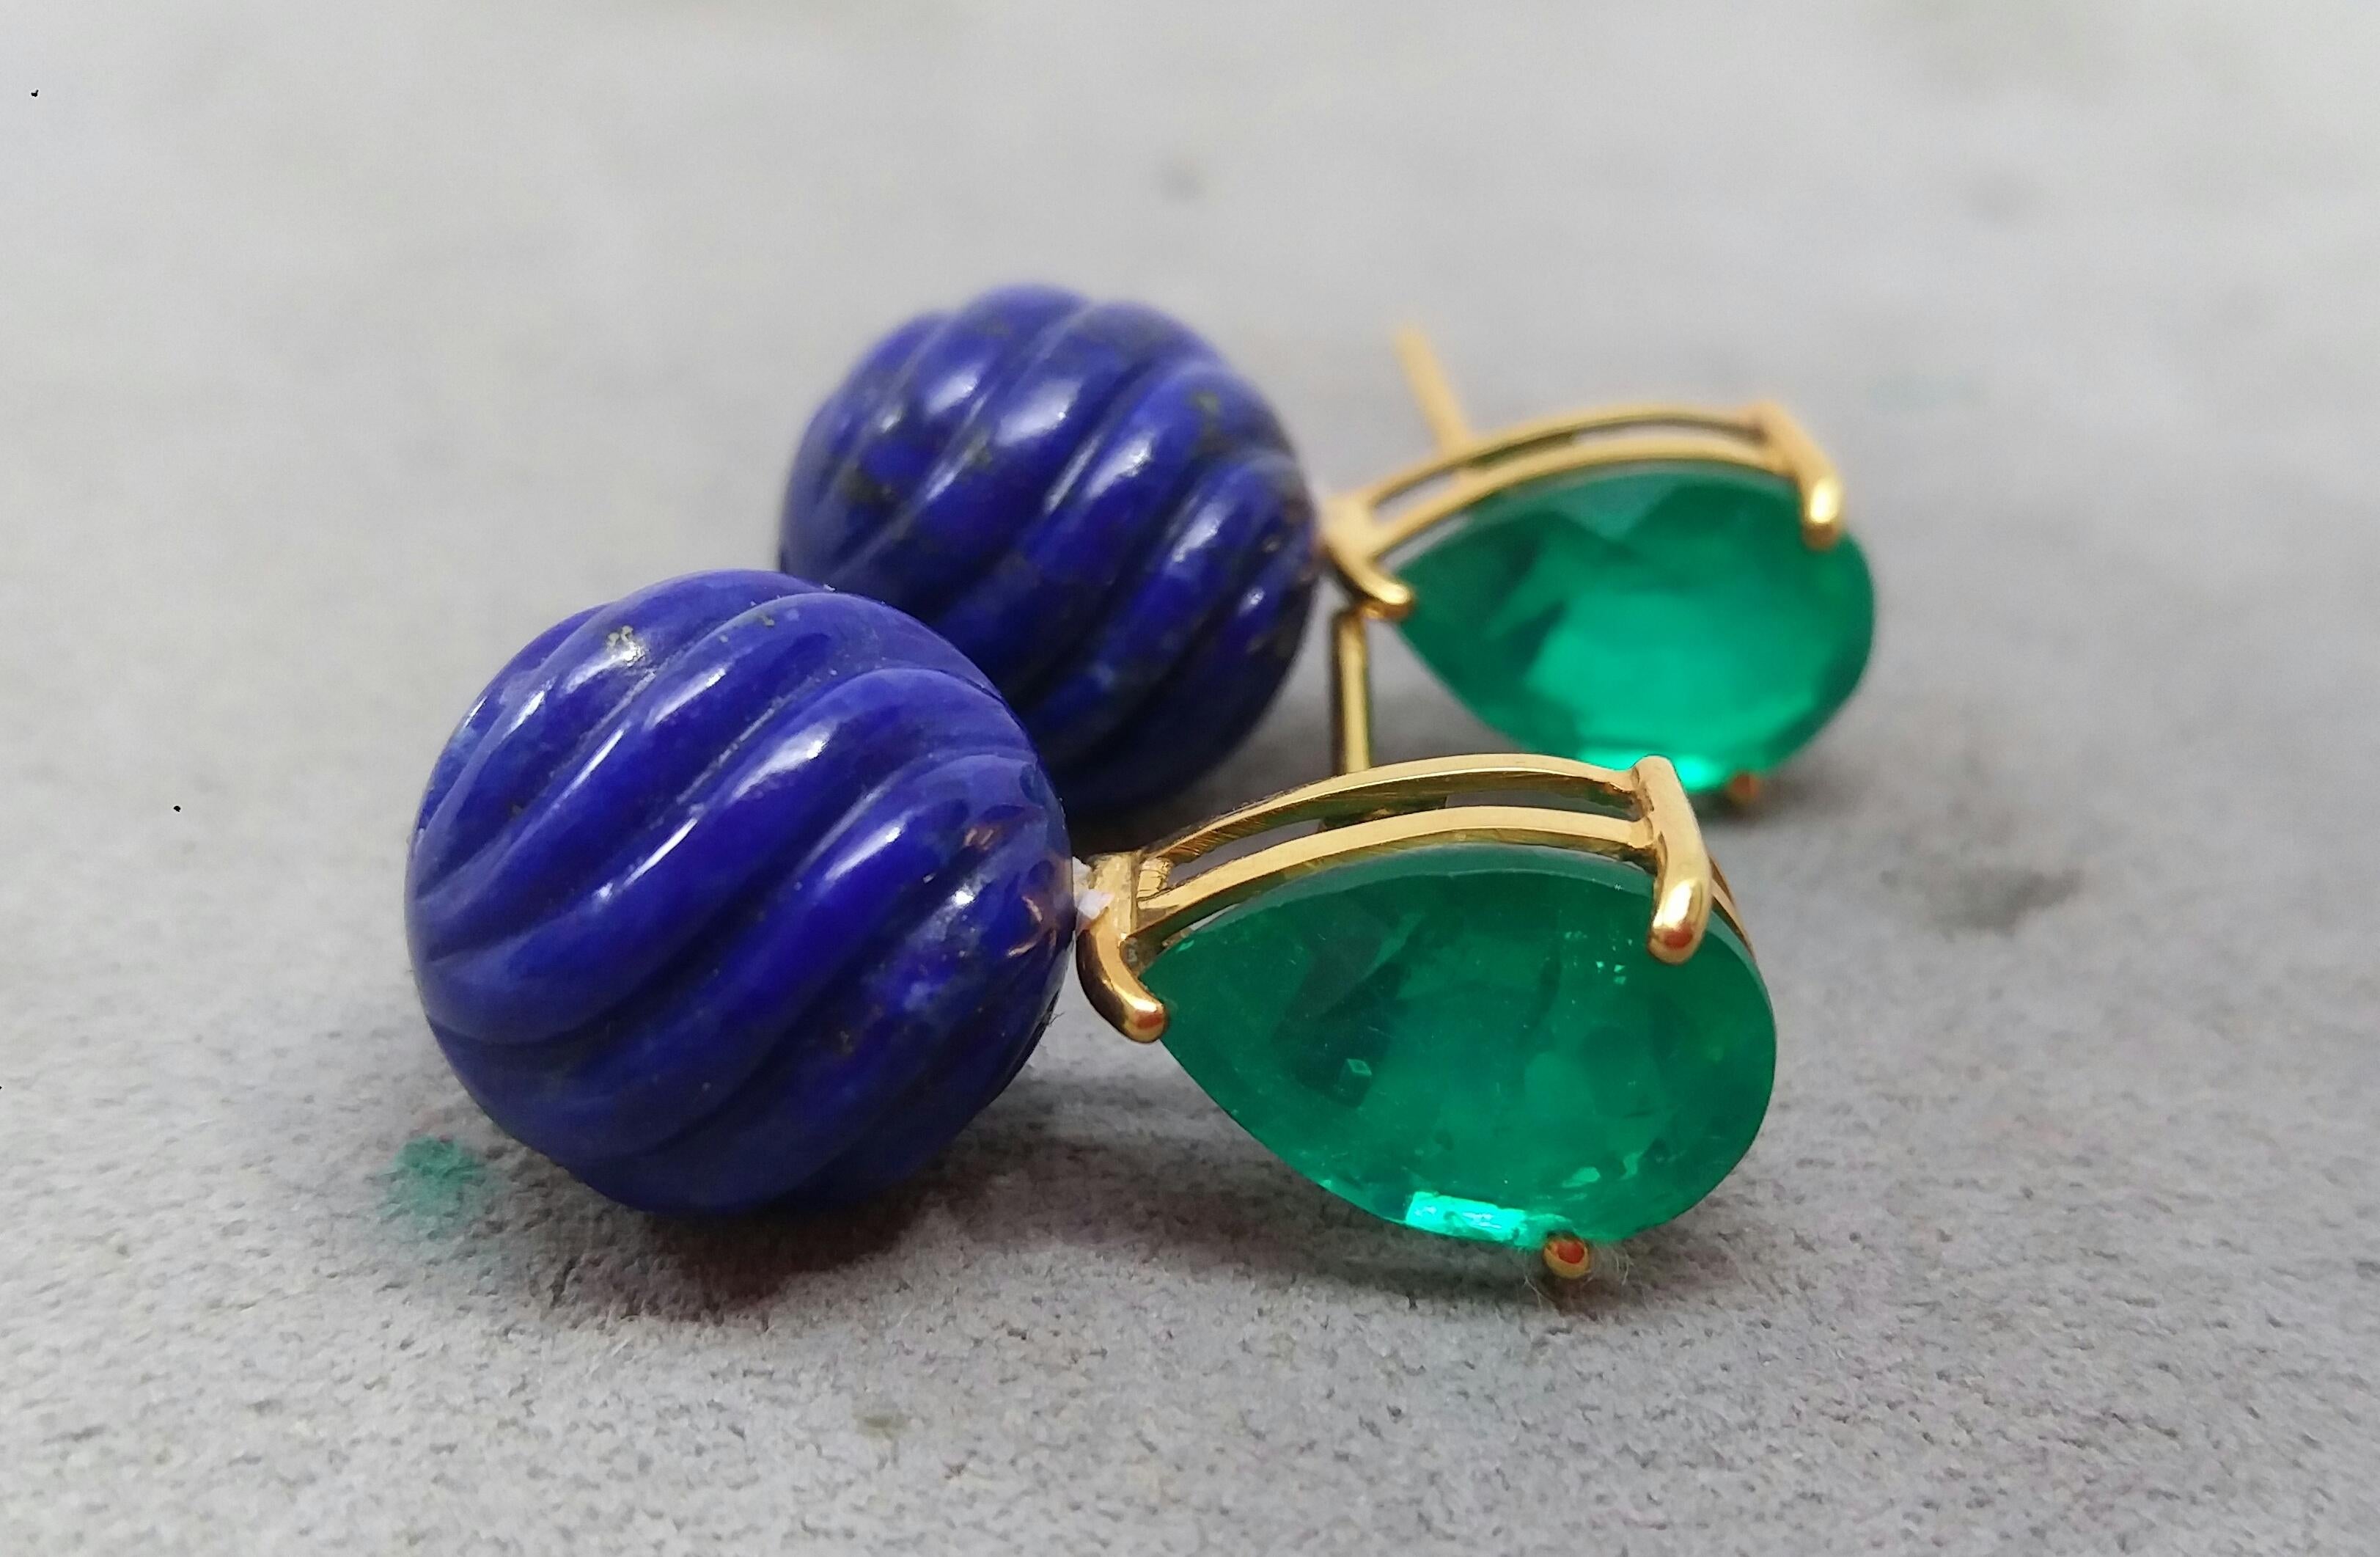 Contemporary Carved Lapis Lazuli Round Beads Green Quartz 14 Karat Yellow Gold Earrings For Sale